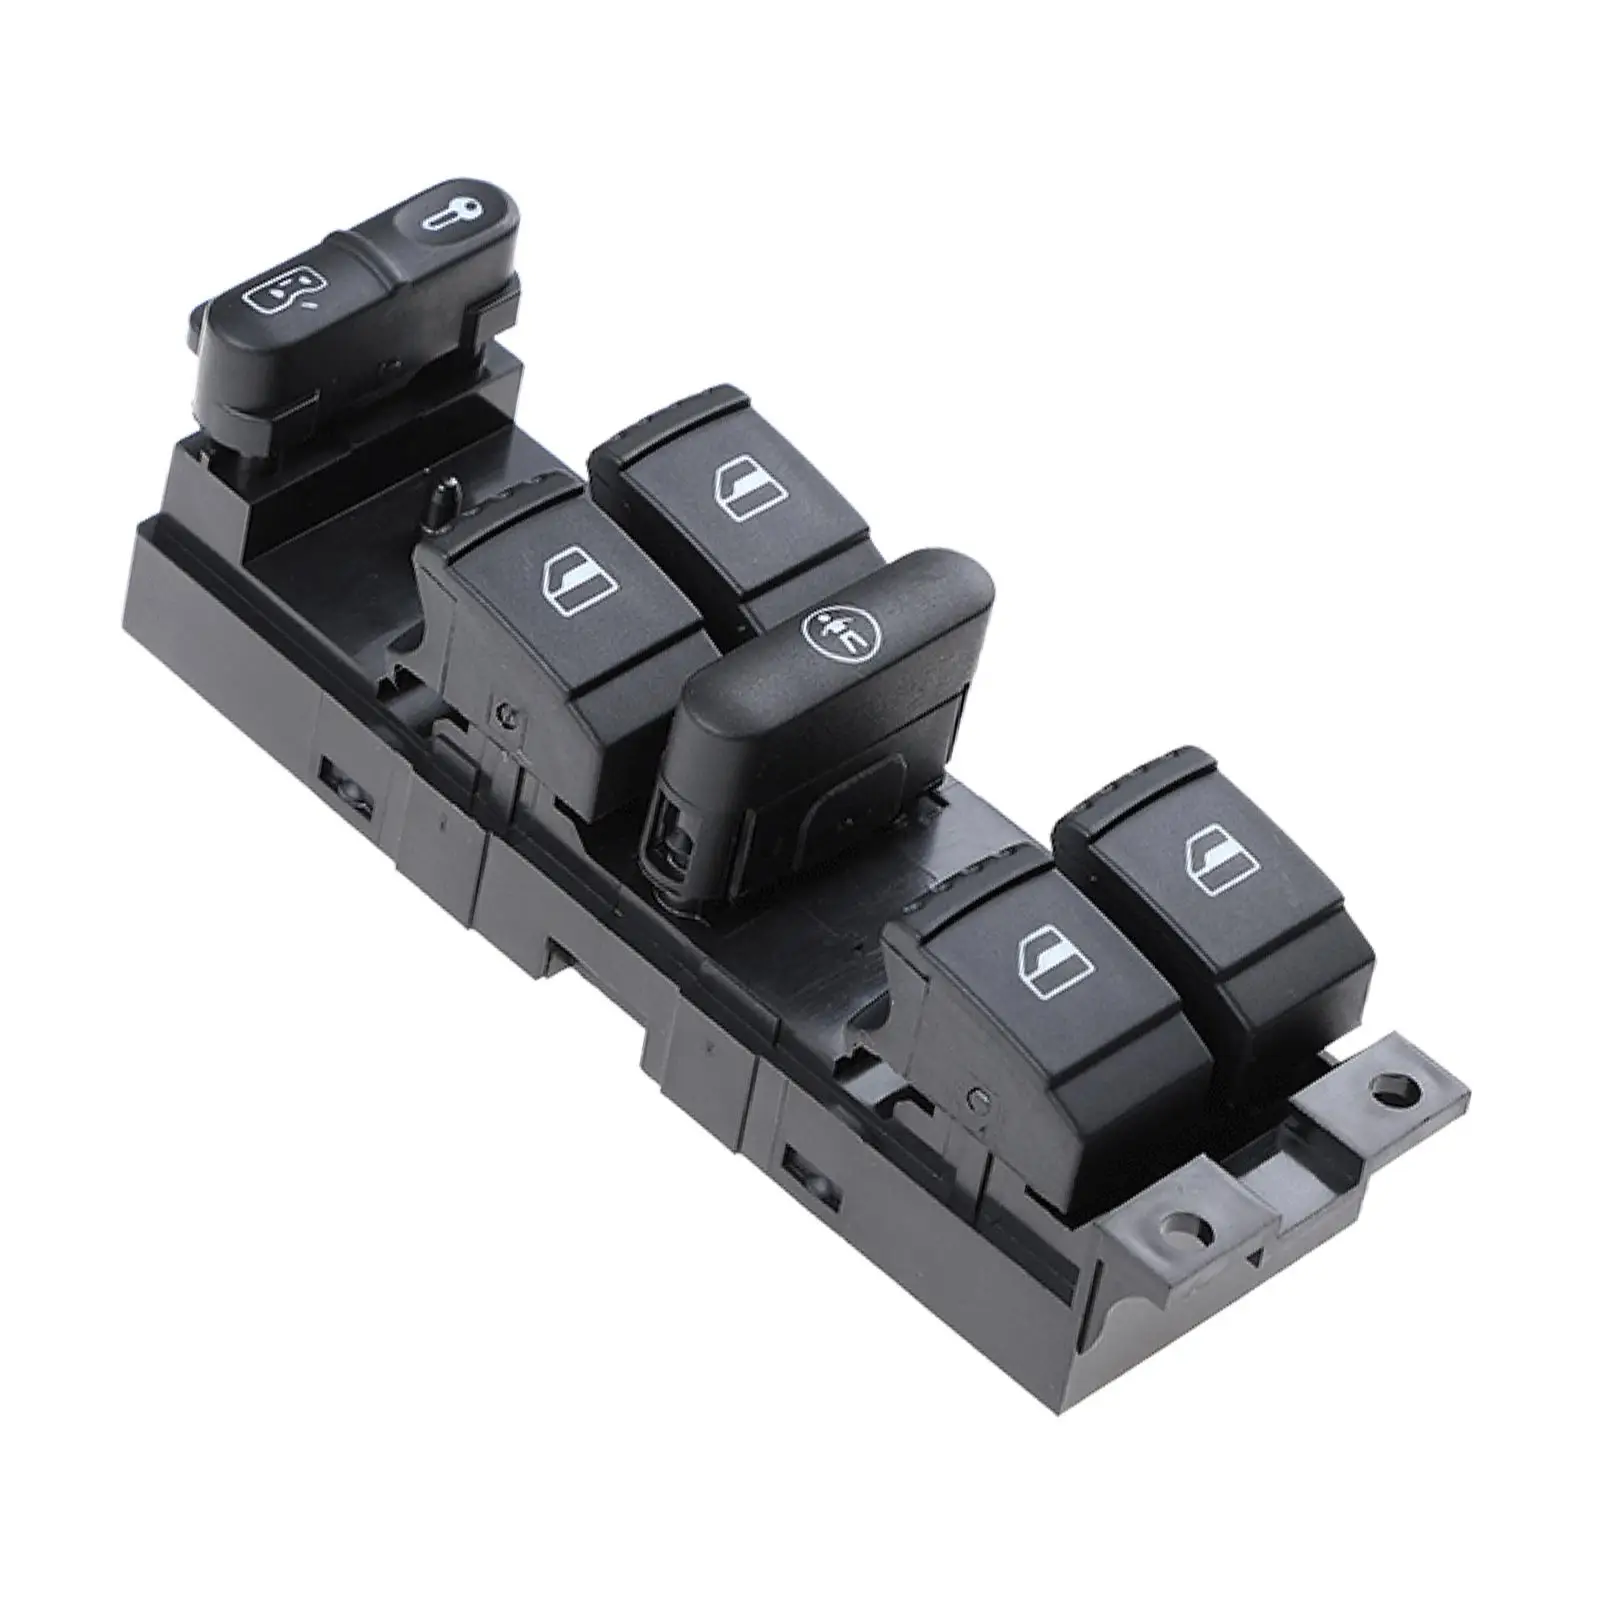 1J4959857A, Window Switch Pack Assembly Auto Window Switch for VW 97-01